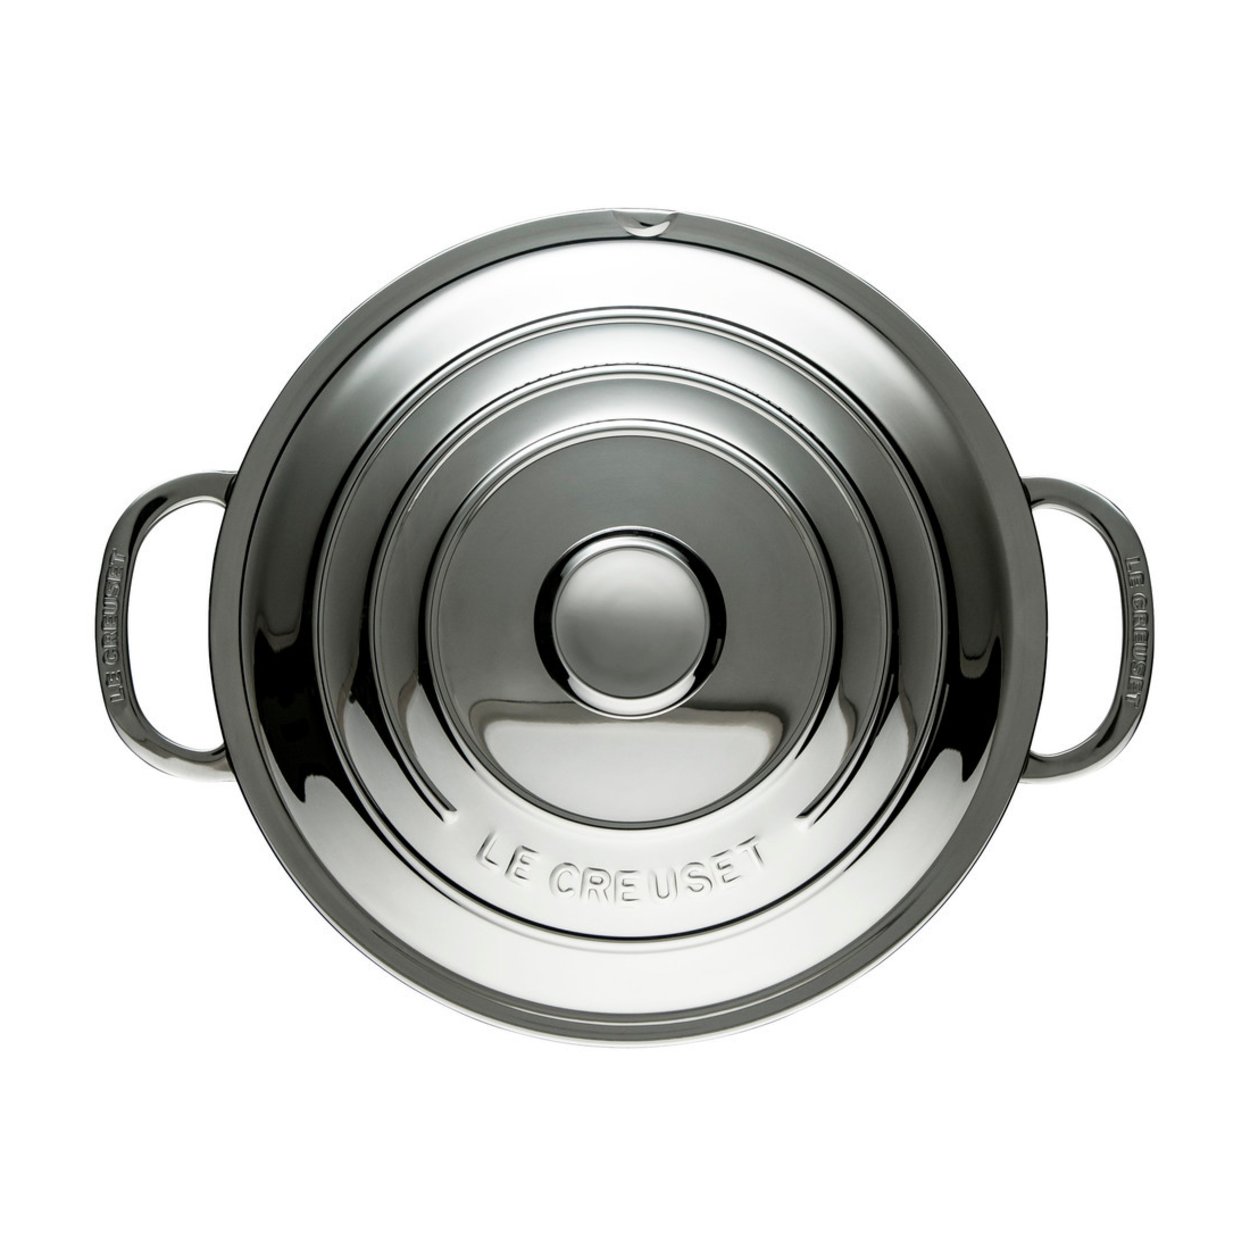 Le Creuset Classic Stainless Steel Saut Pan with Lid